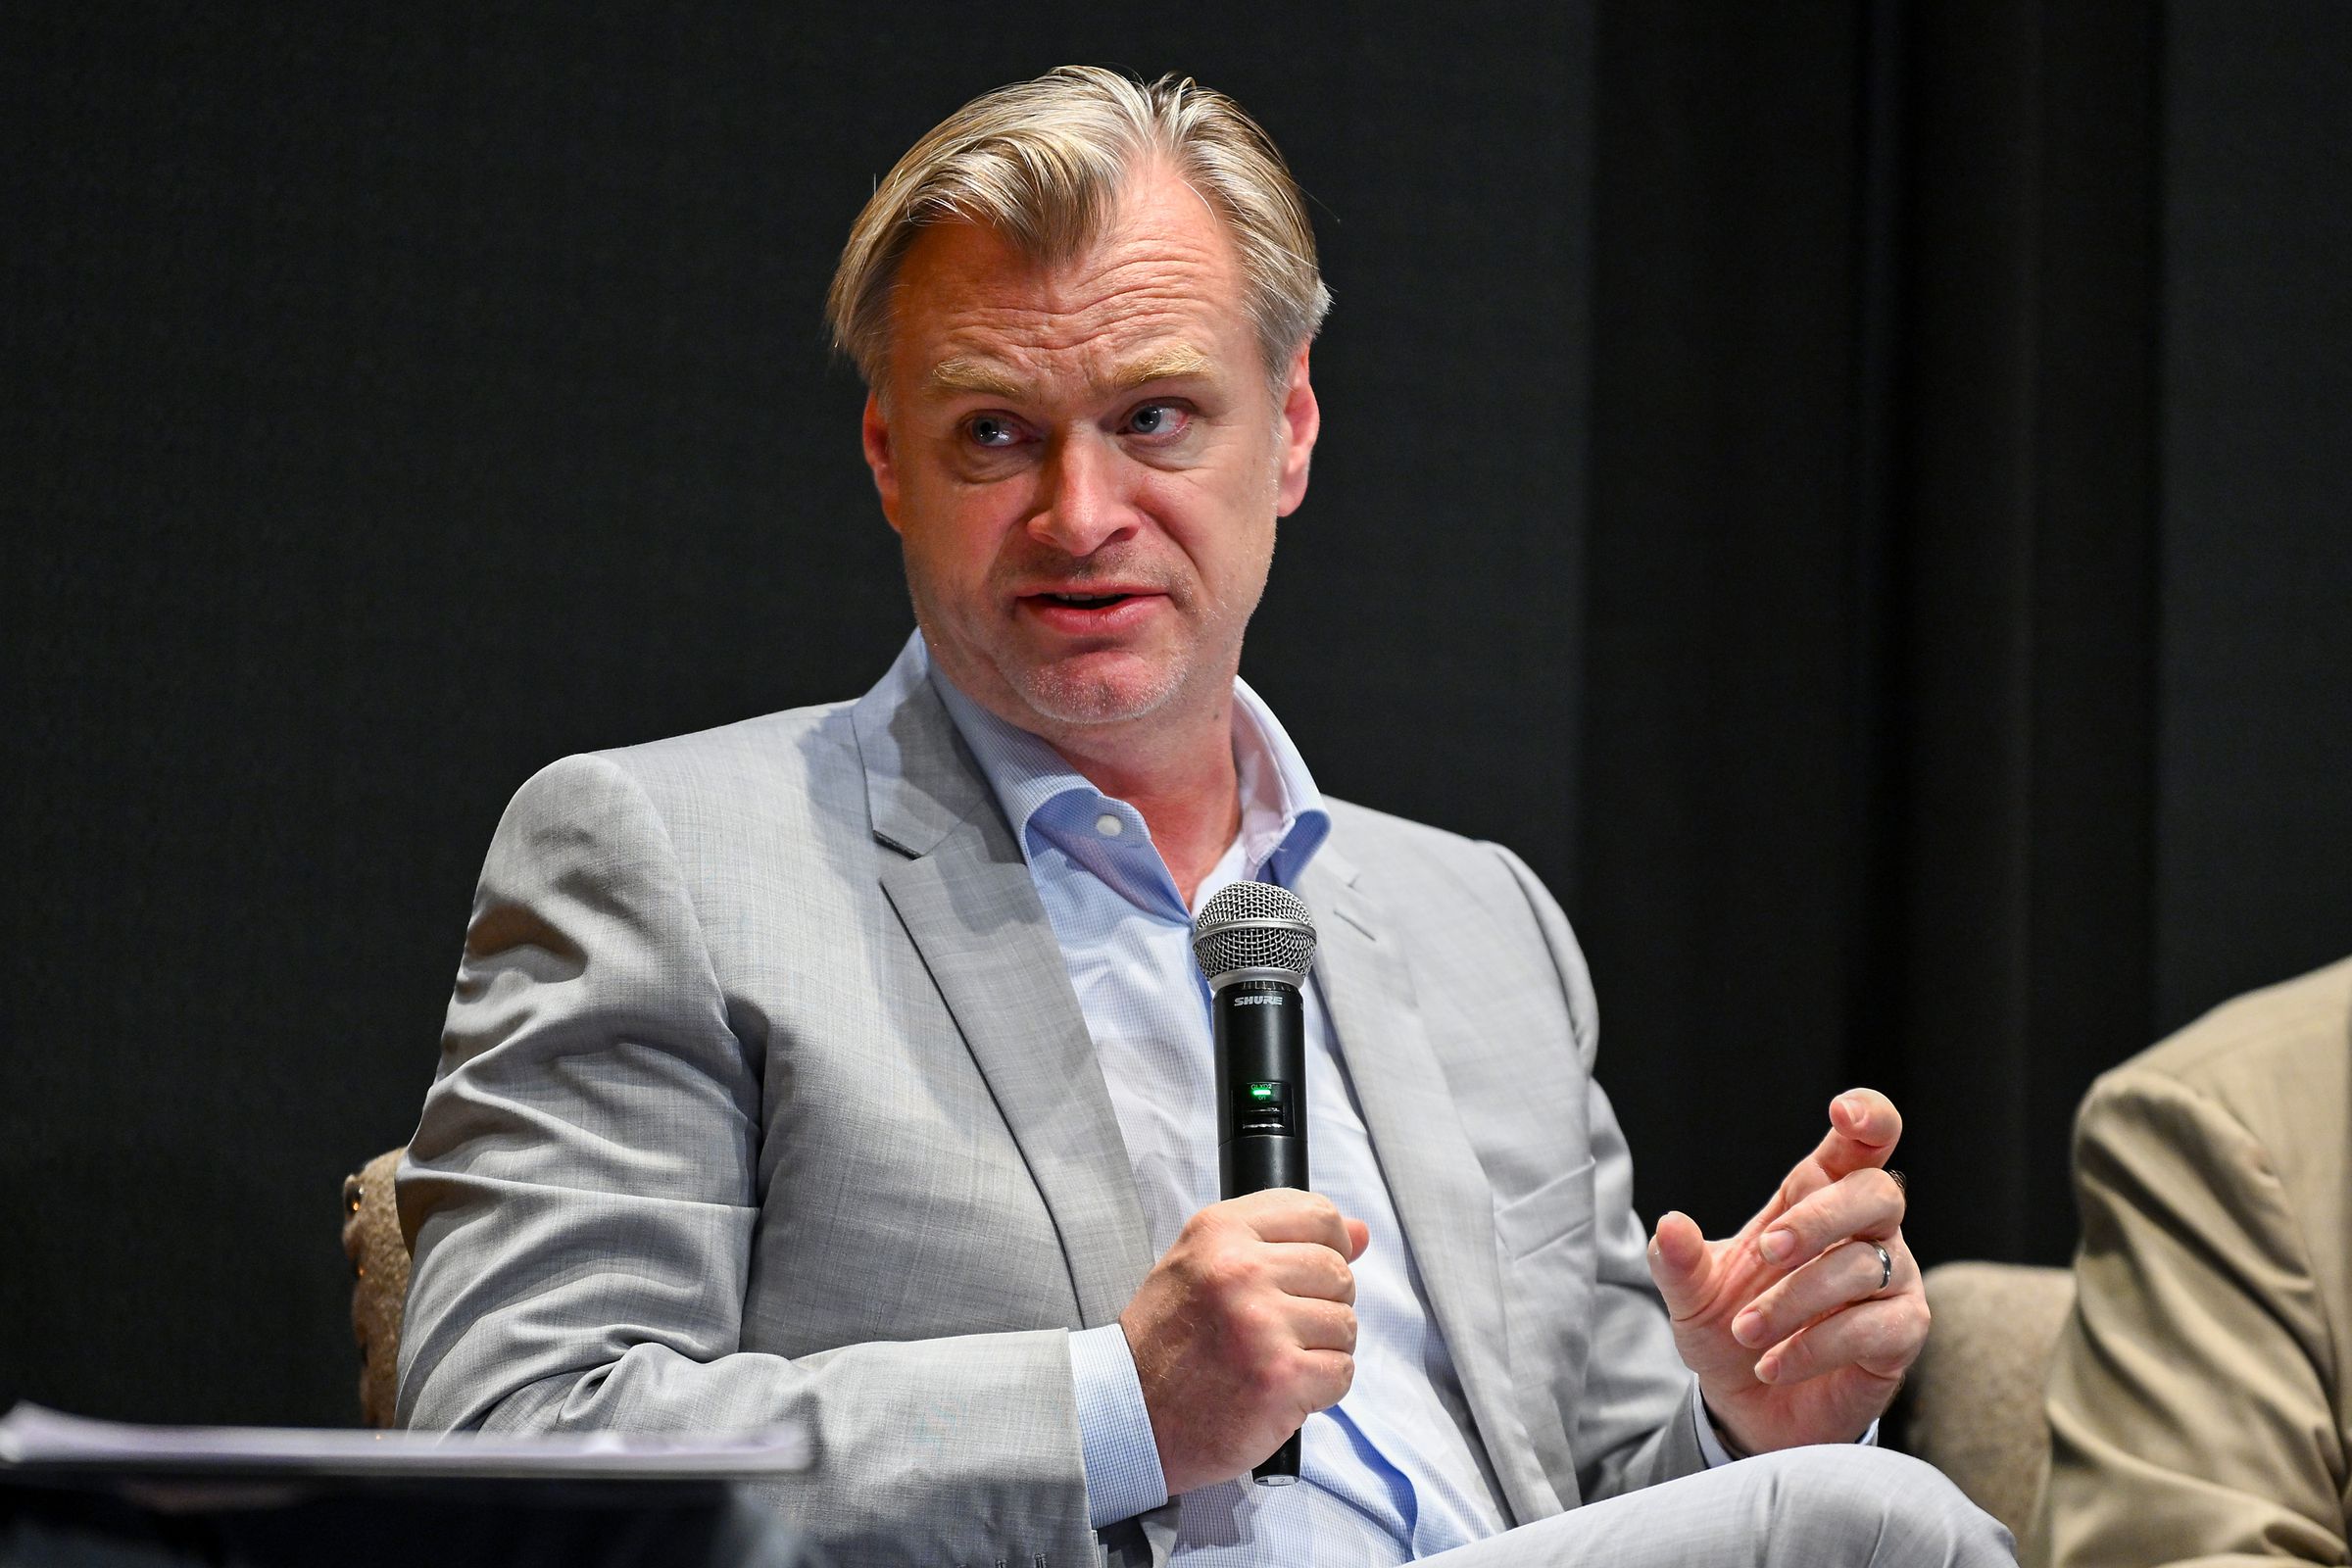 Christopher Nolan, a white man, sits at a panel holding a microphone and speaking.